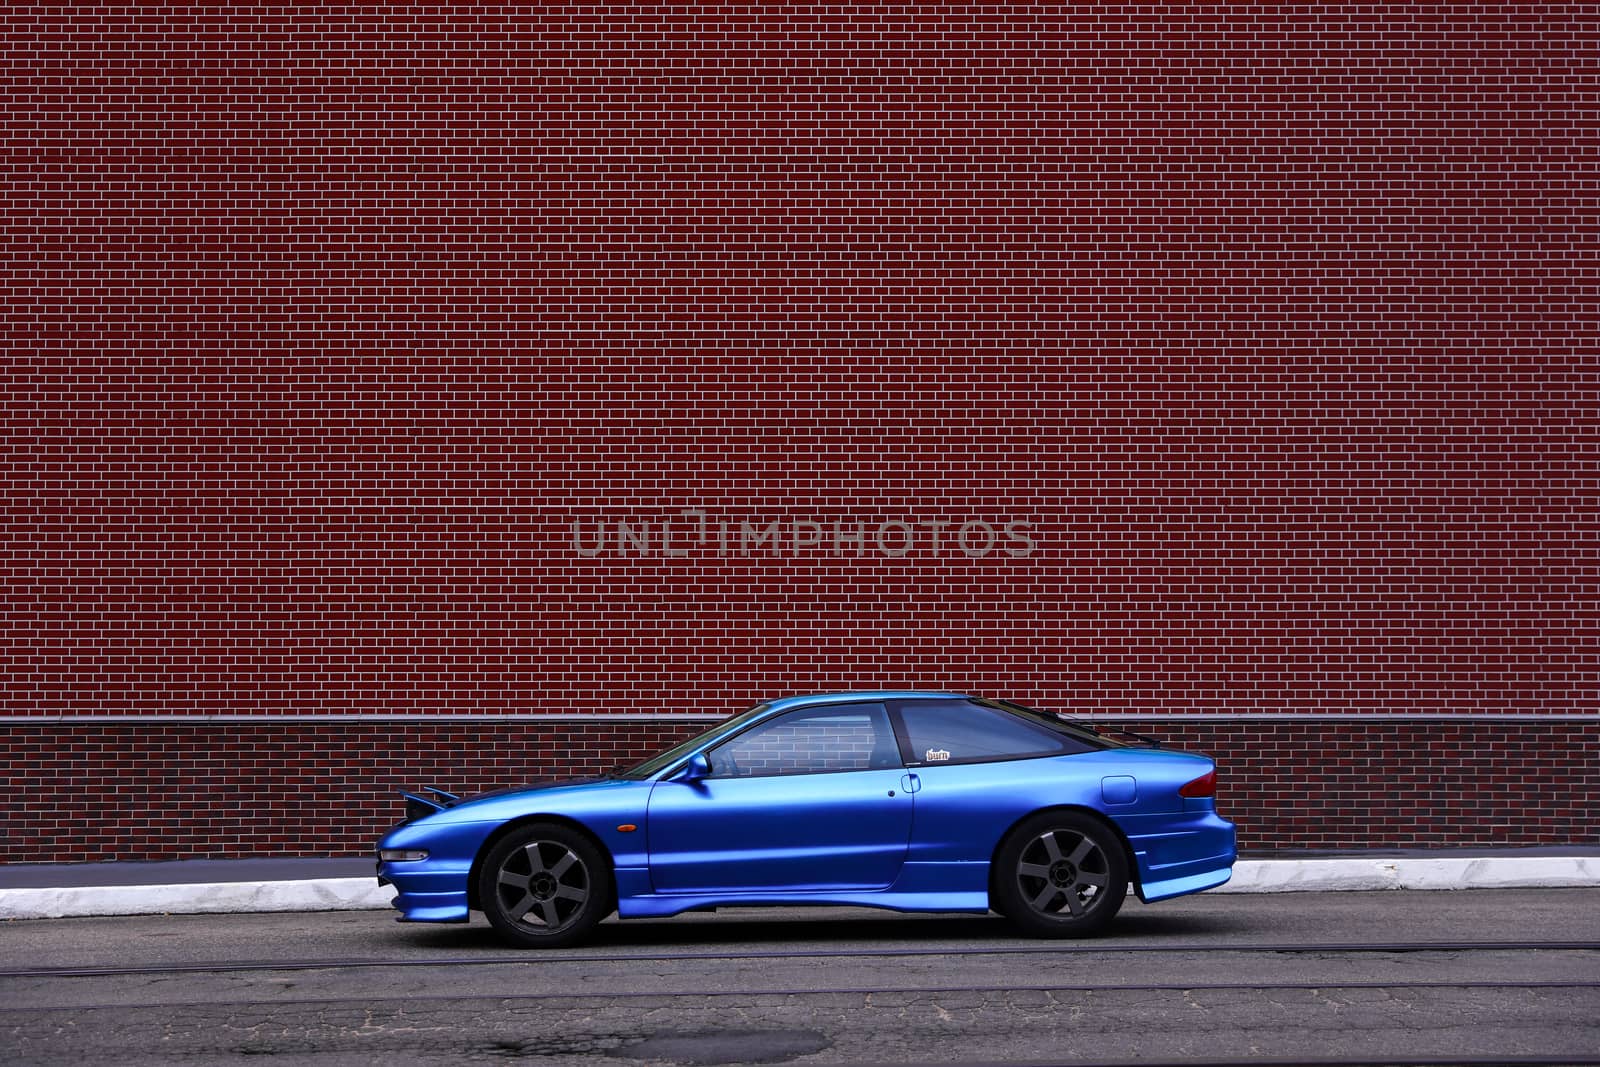 Blue Ford Probe behind a red brick wall